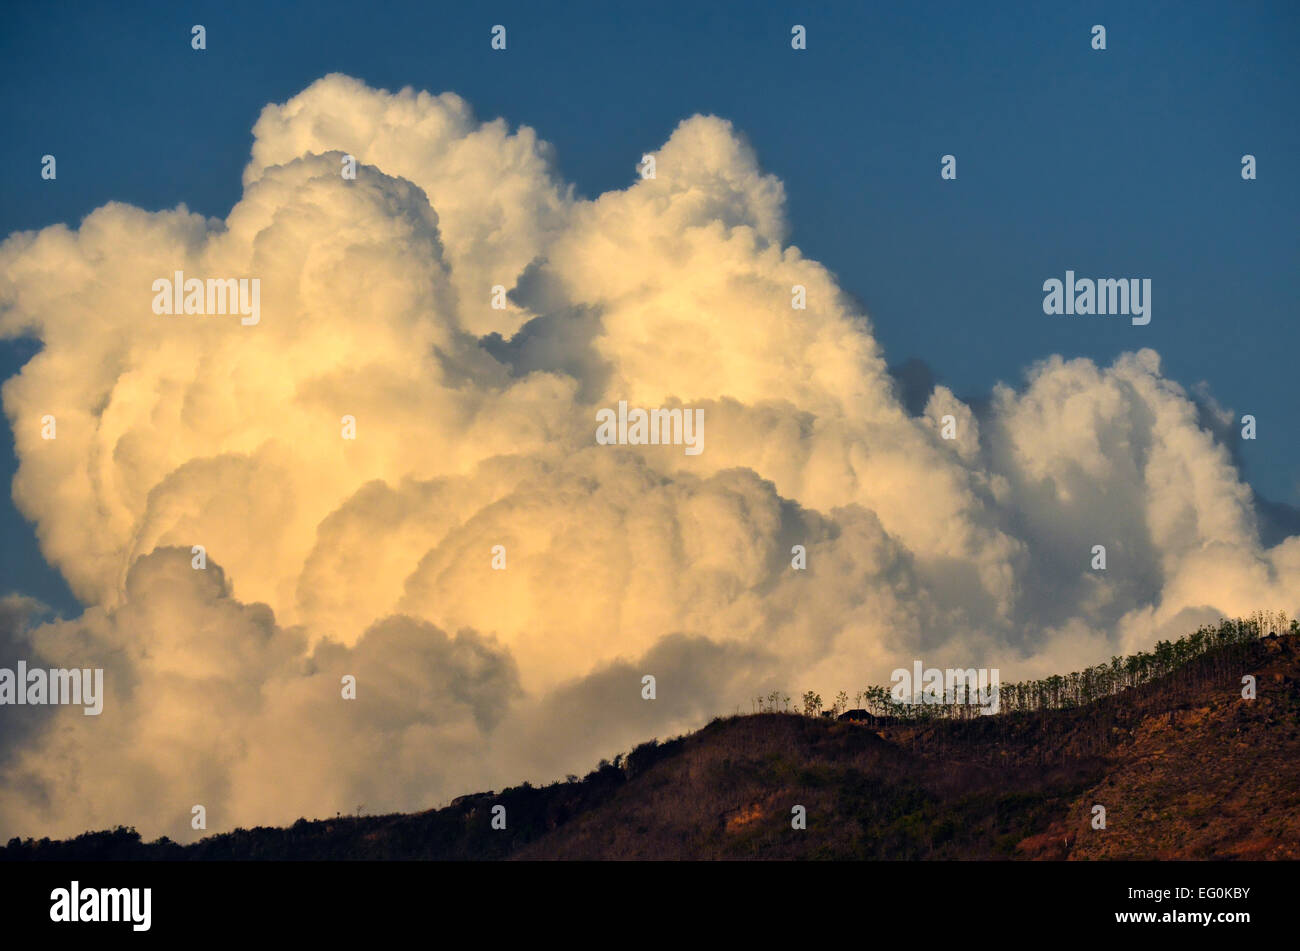 Indonesia, Hills and cumulus cloud Stock Photo